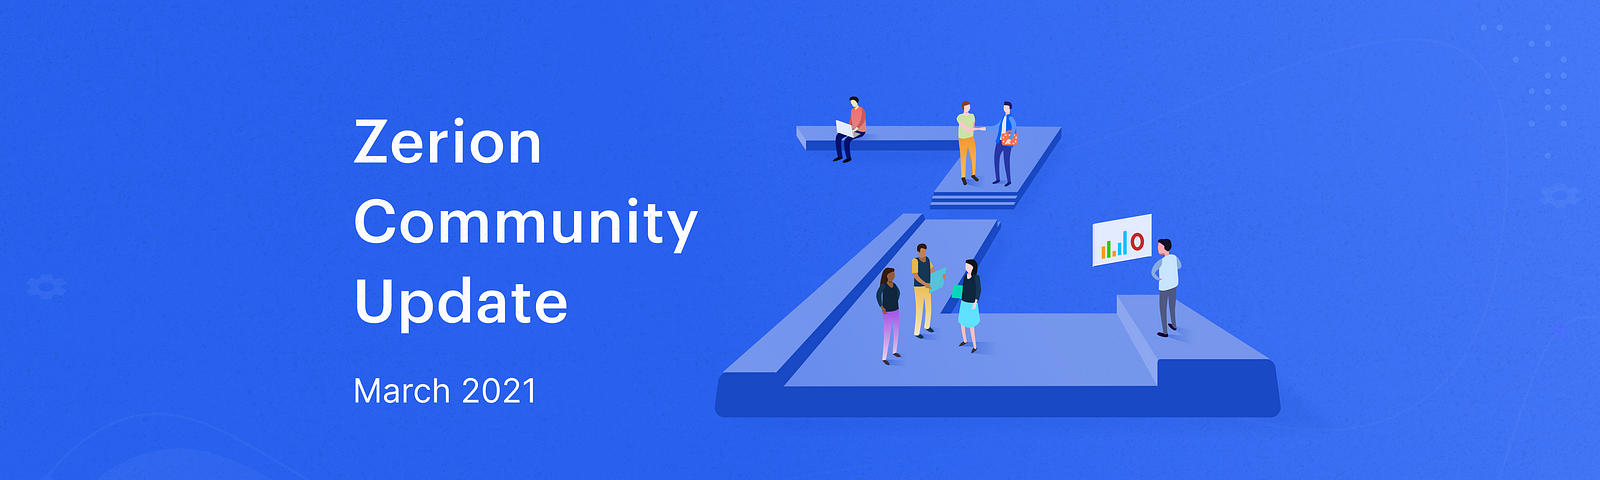 Zerion Community Update: March 2021